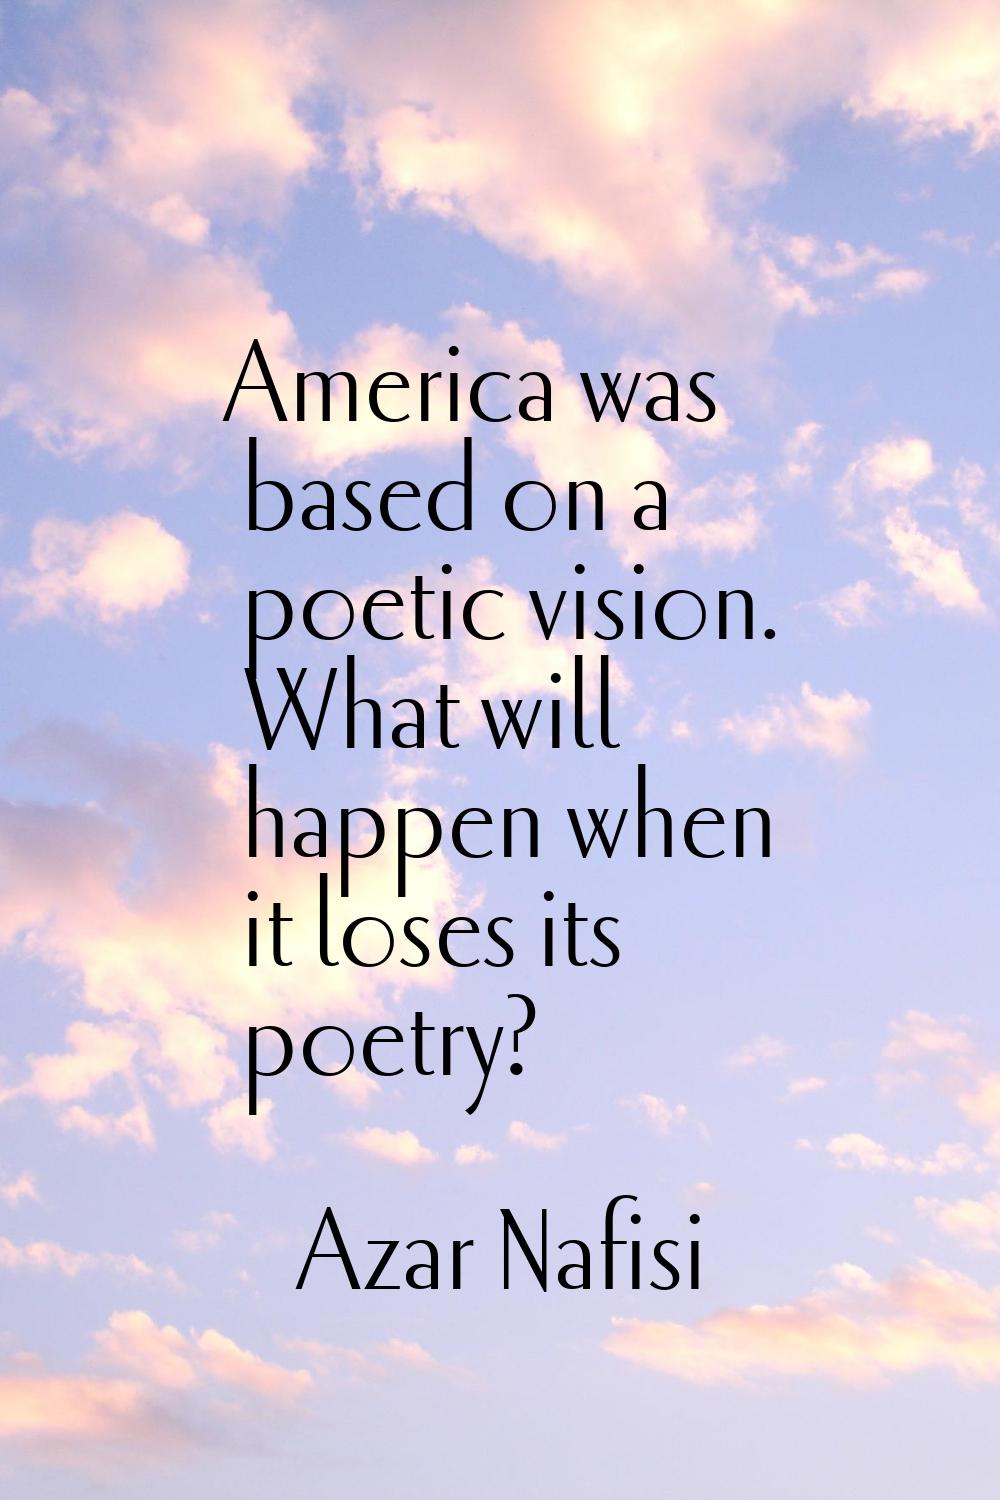 America was based on a poetic vision. What will happen when it loses its poetry?